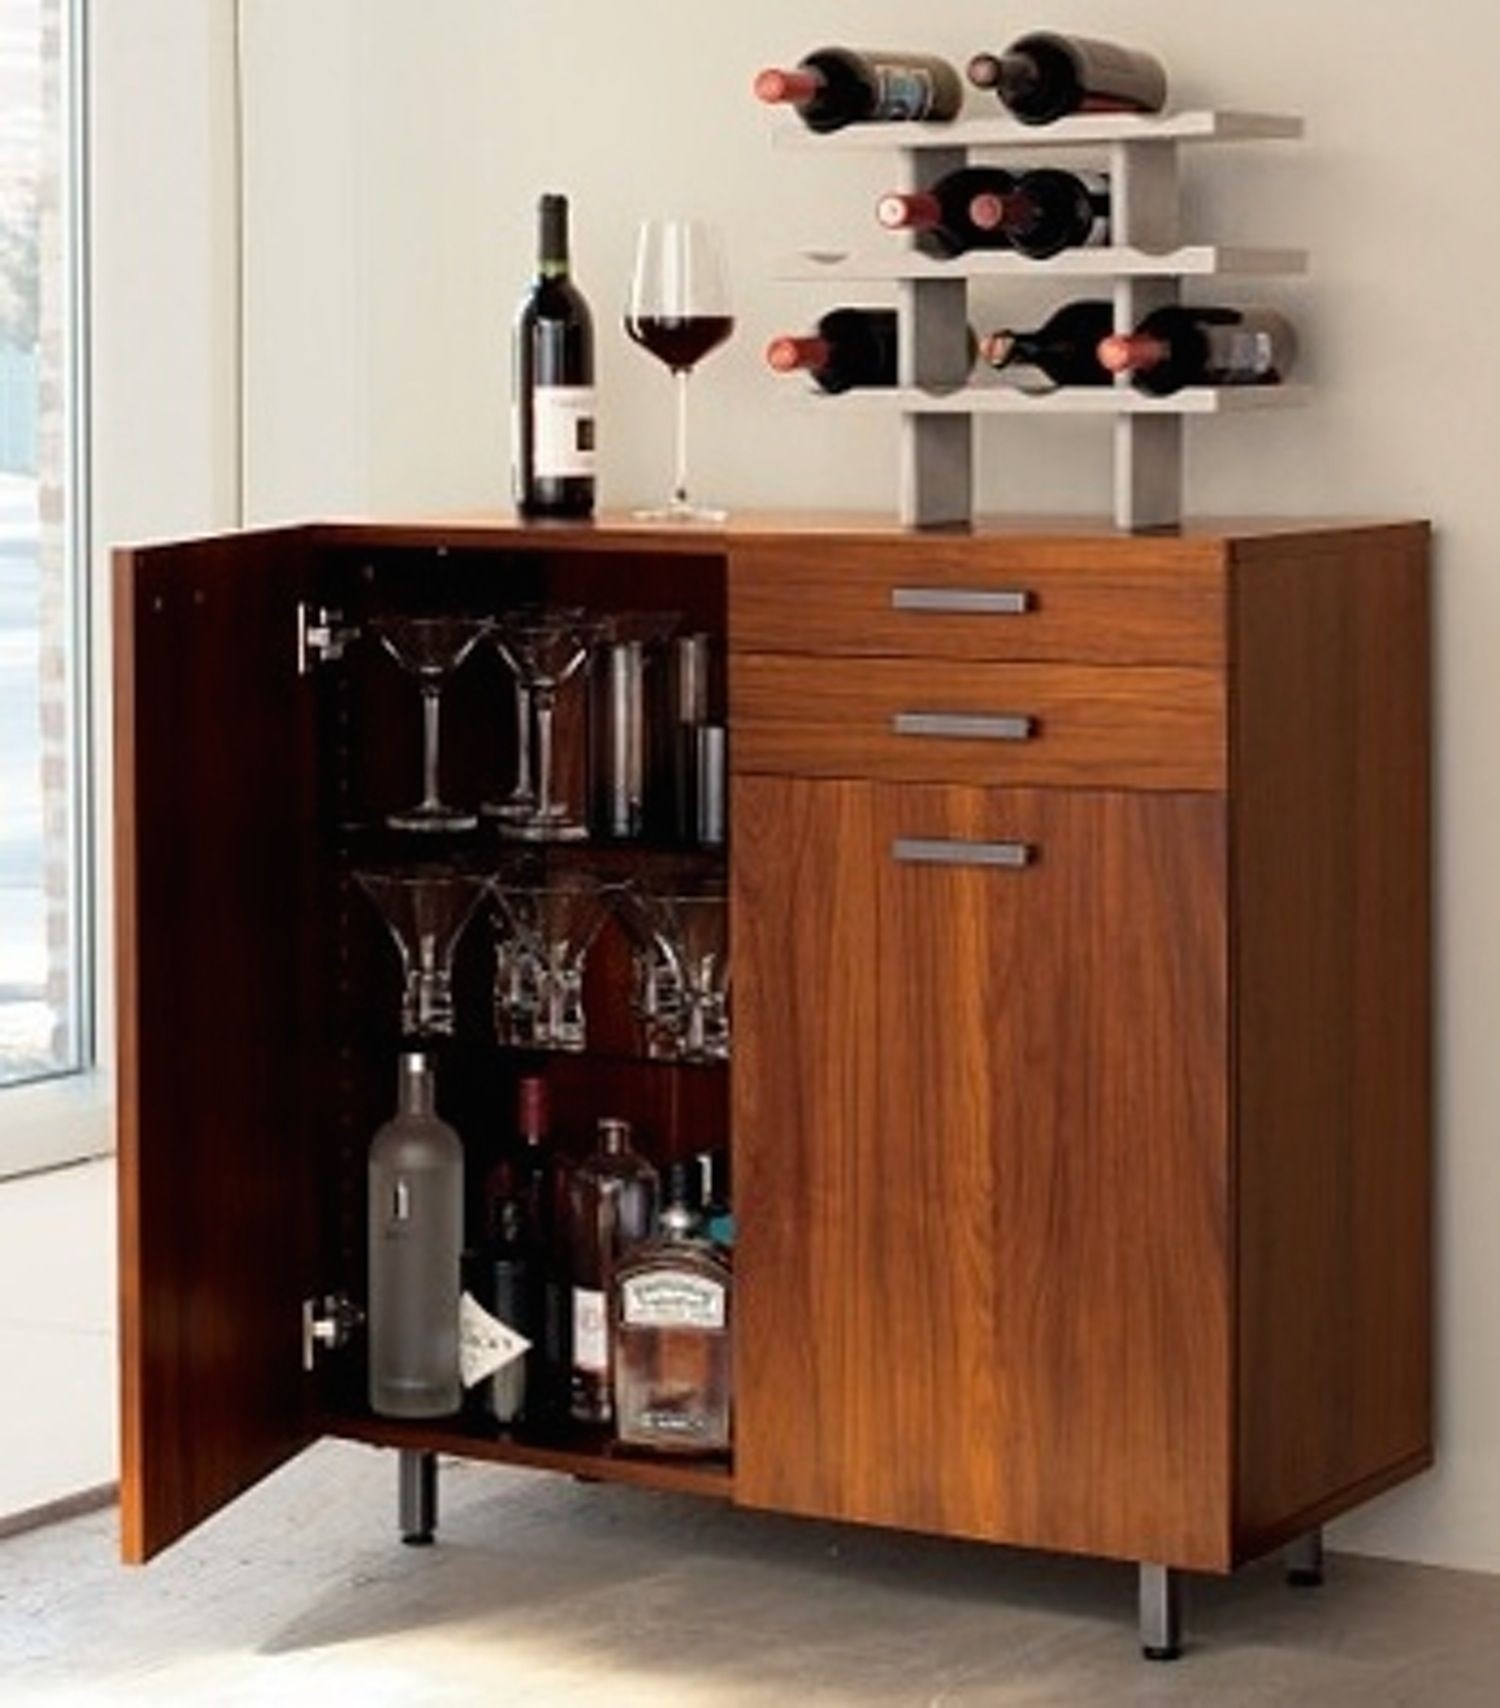 Choosing the Best Wall Mounted Liquor Cabinet - SirMixABot